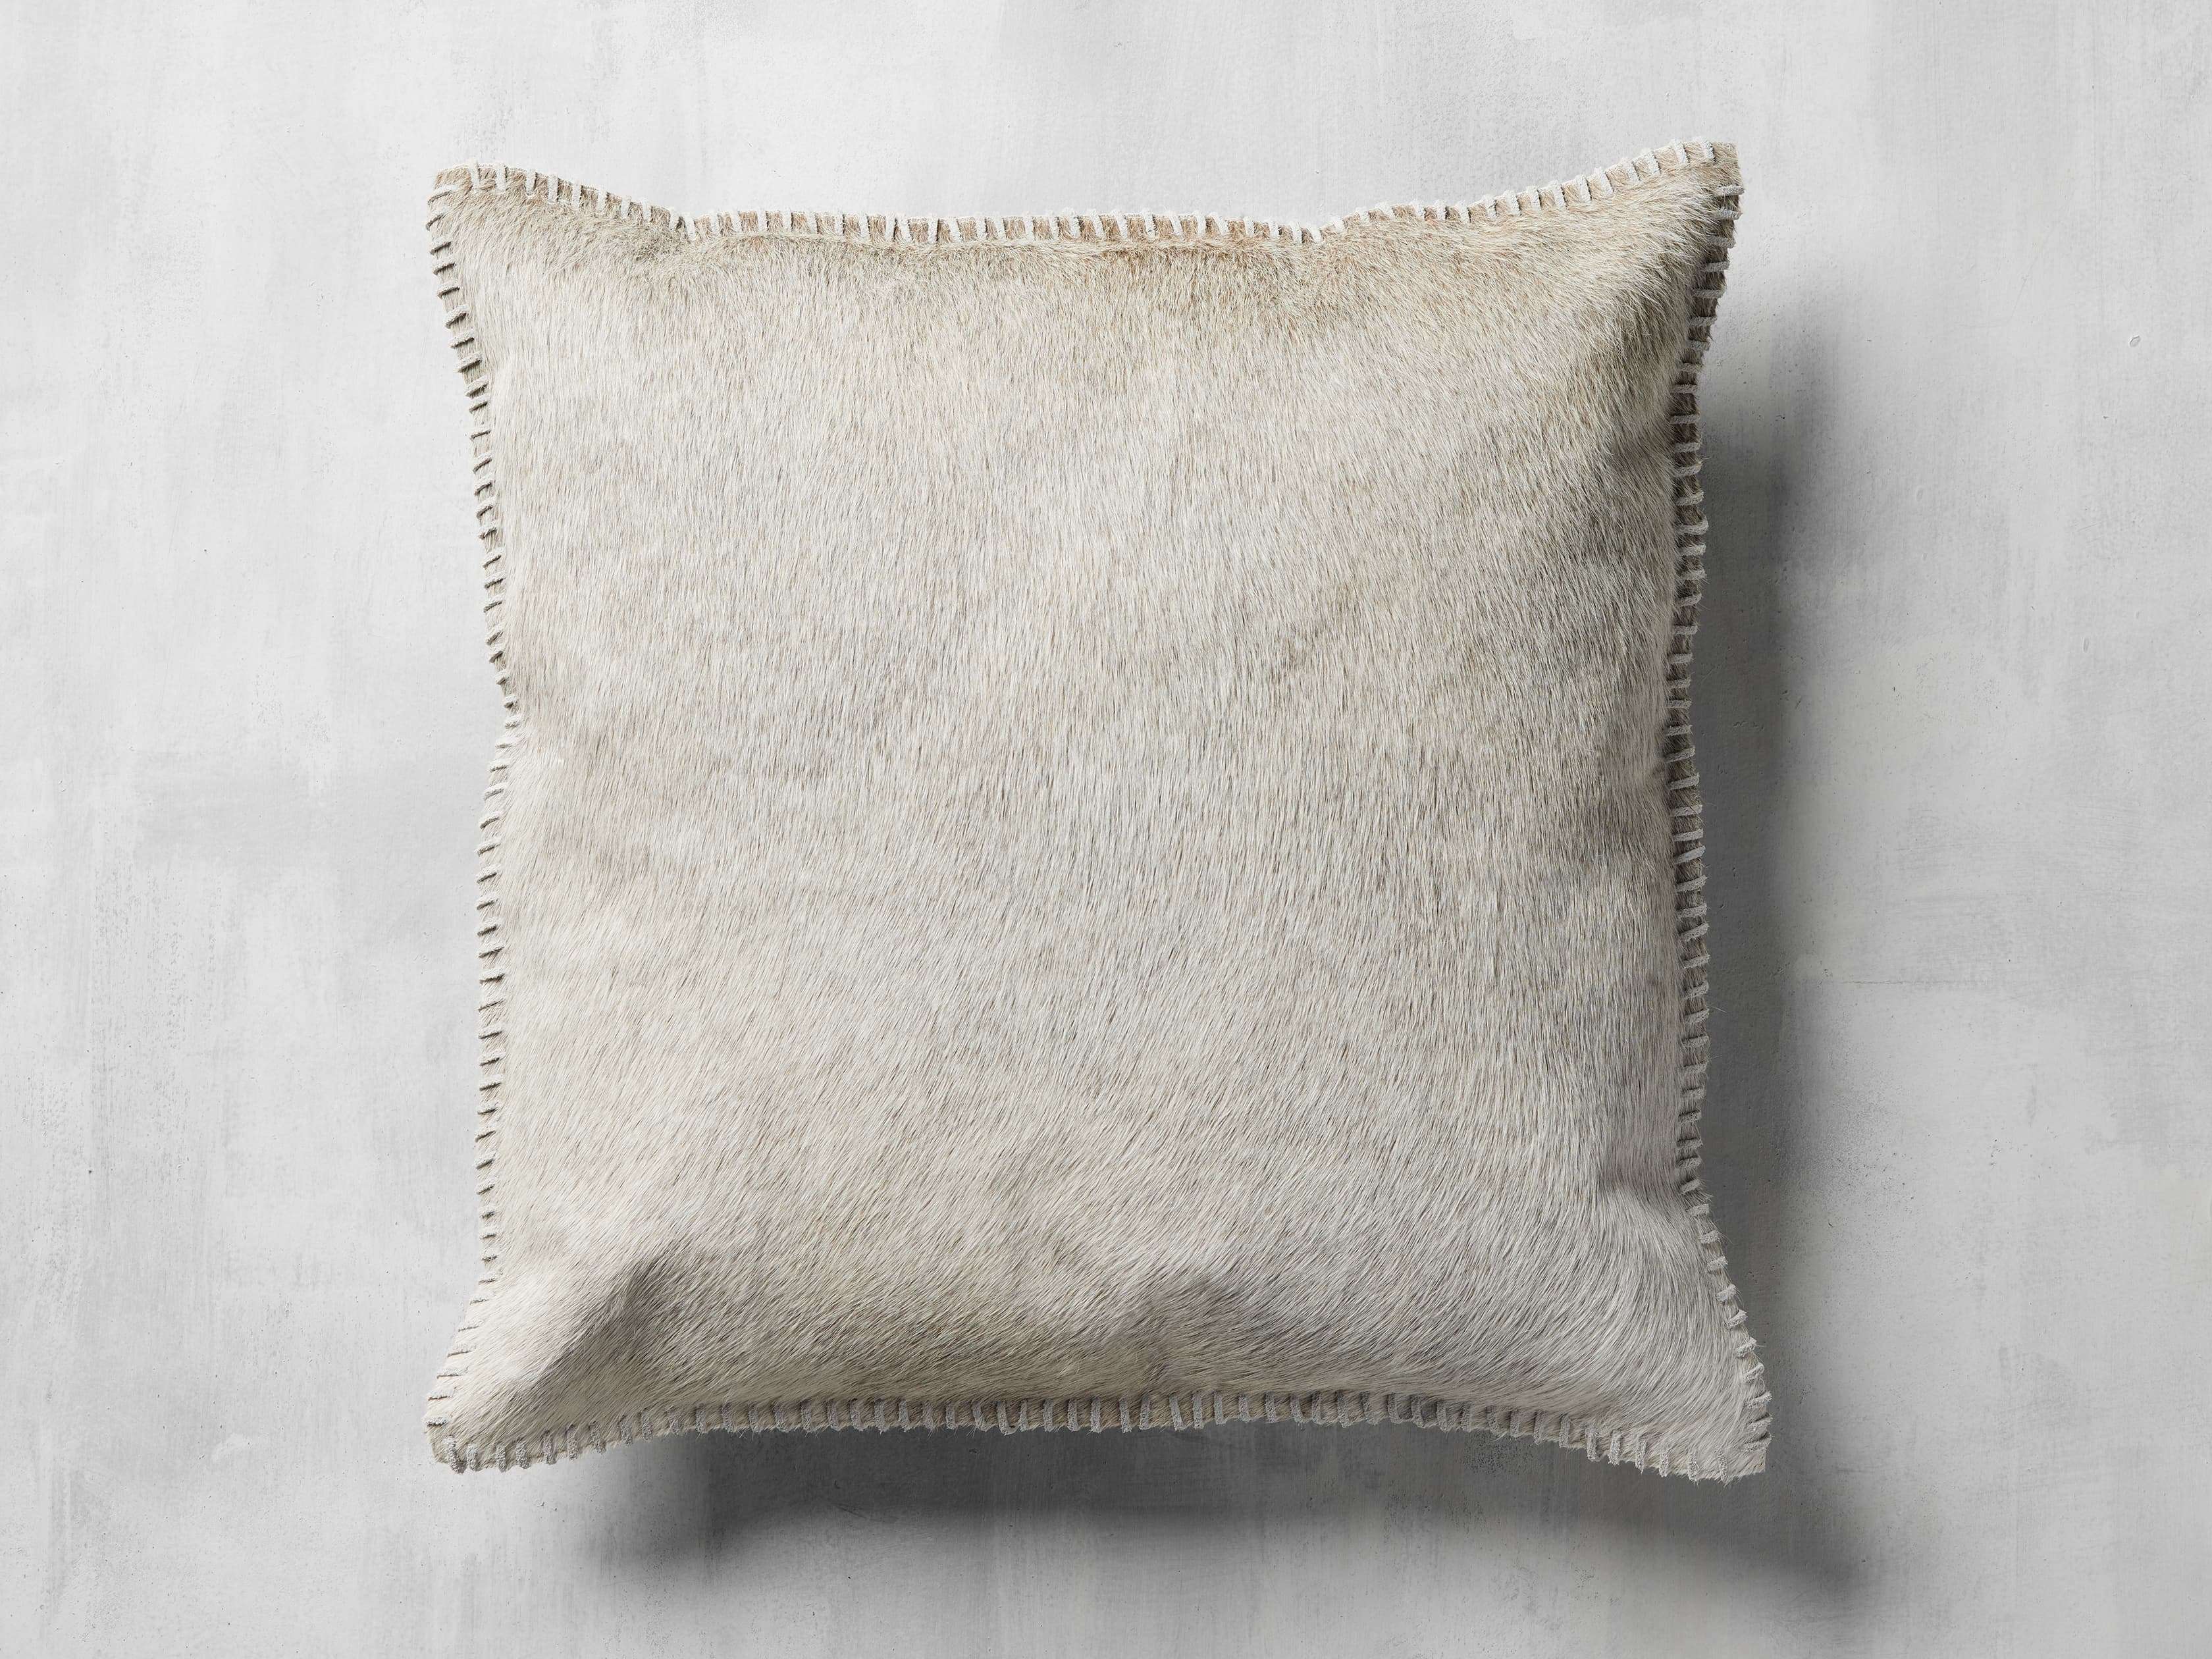 Sol Living Decorative Accent Pillows Throw Pillow for Couch Bedroom Soft Cushions - 20 x 12 in - White with Tassels - Single